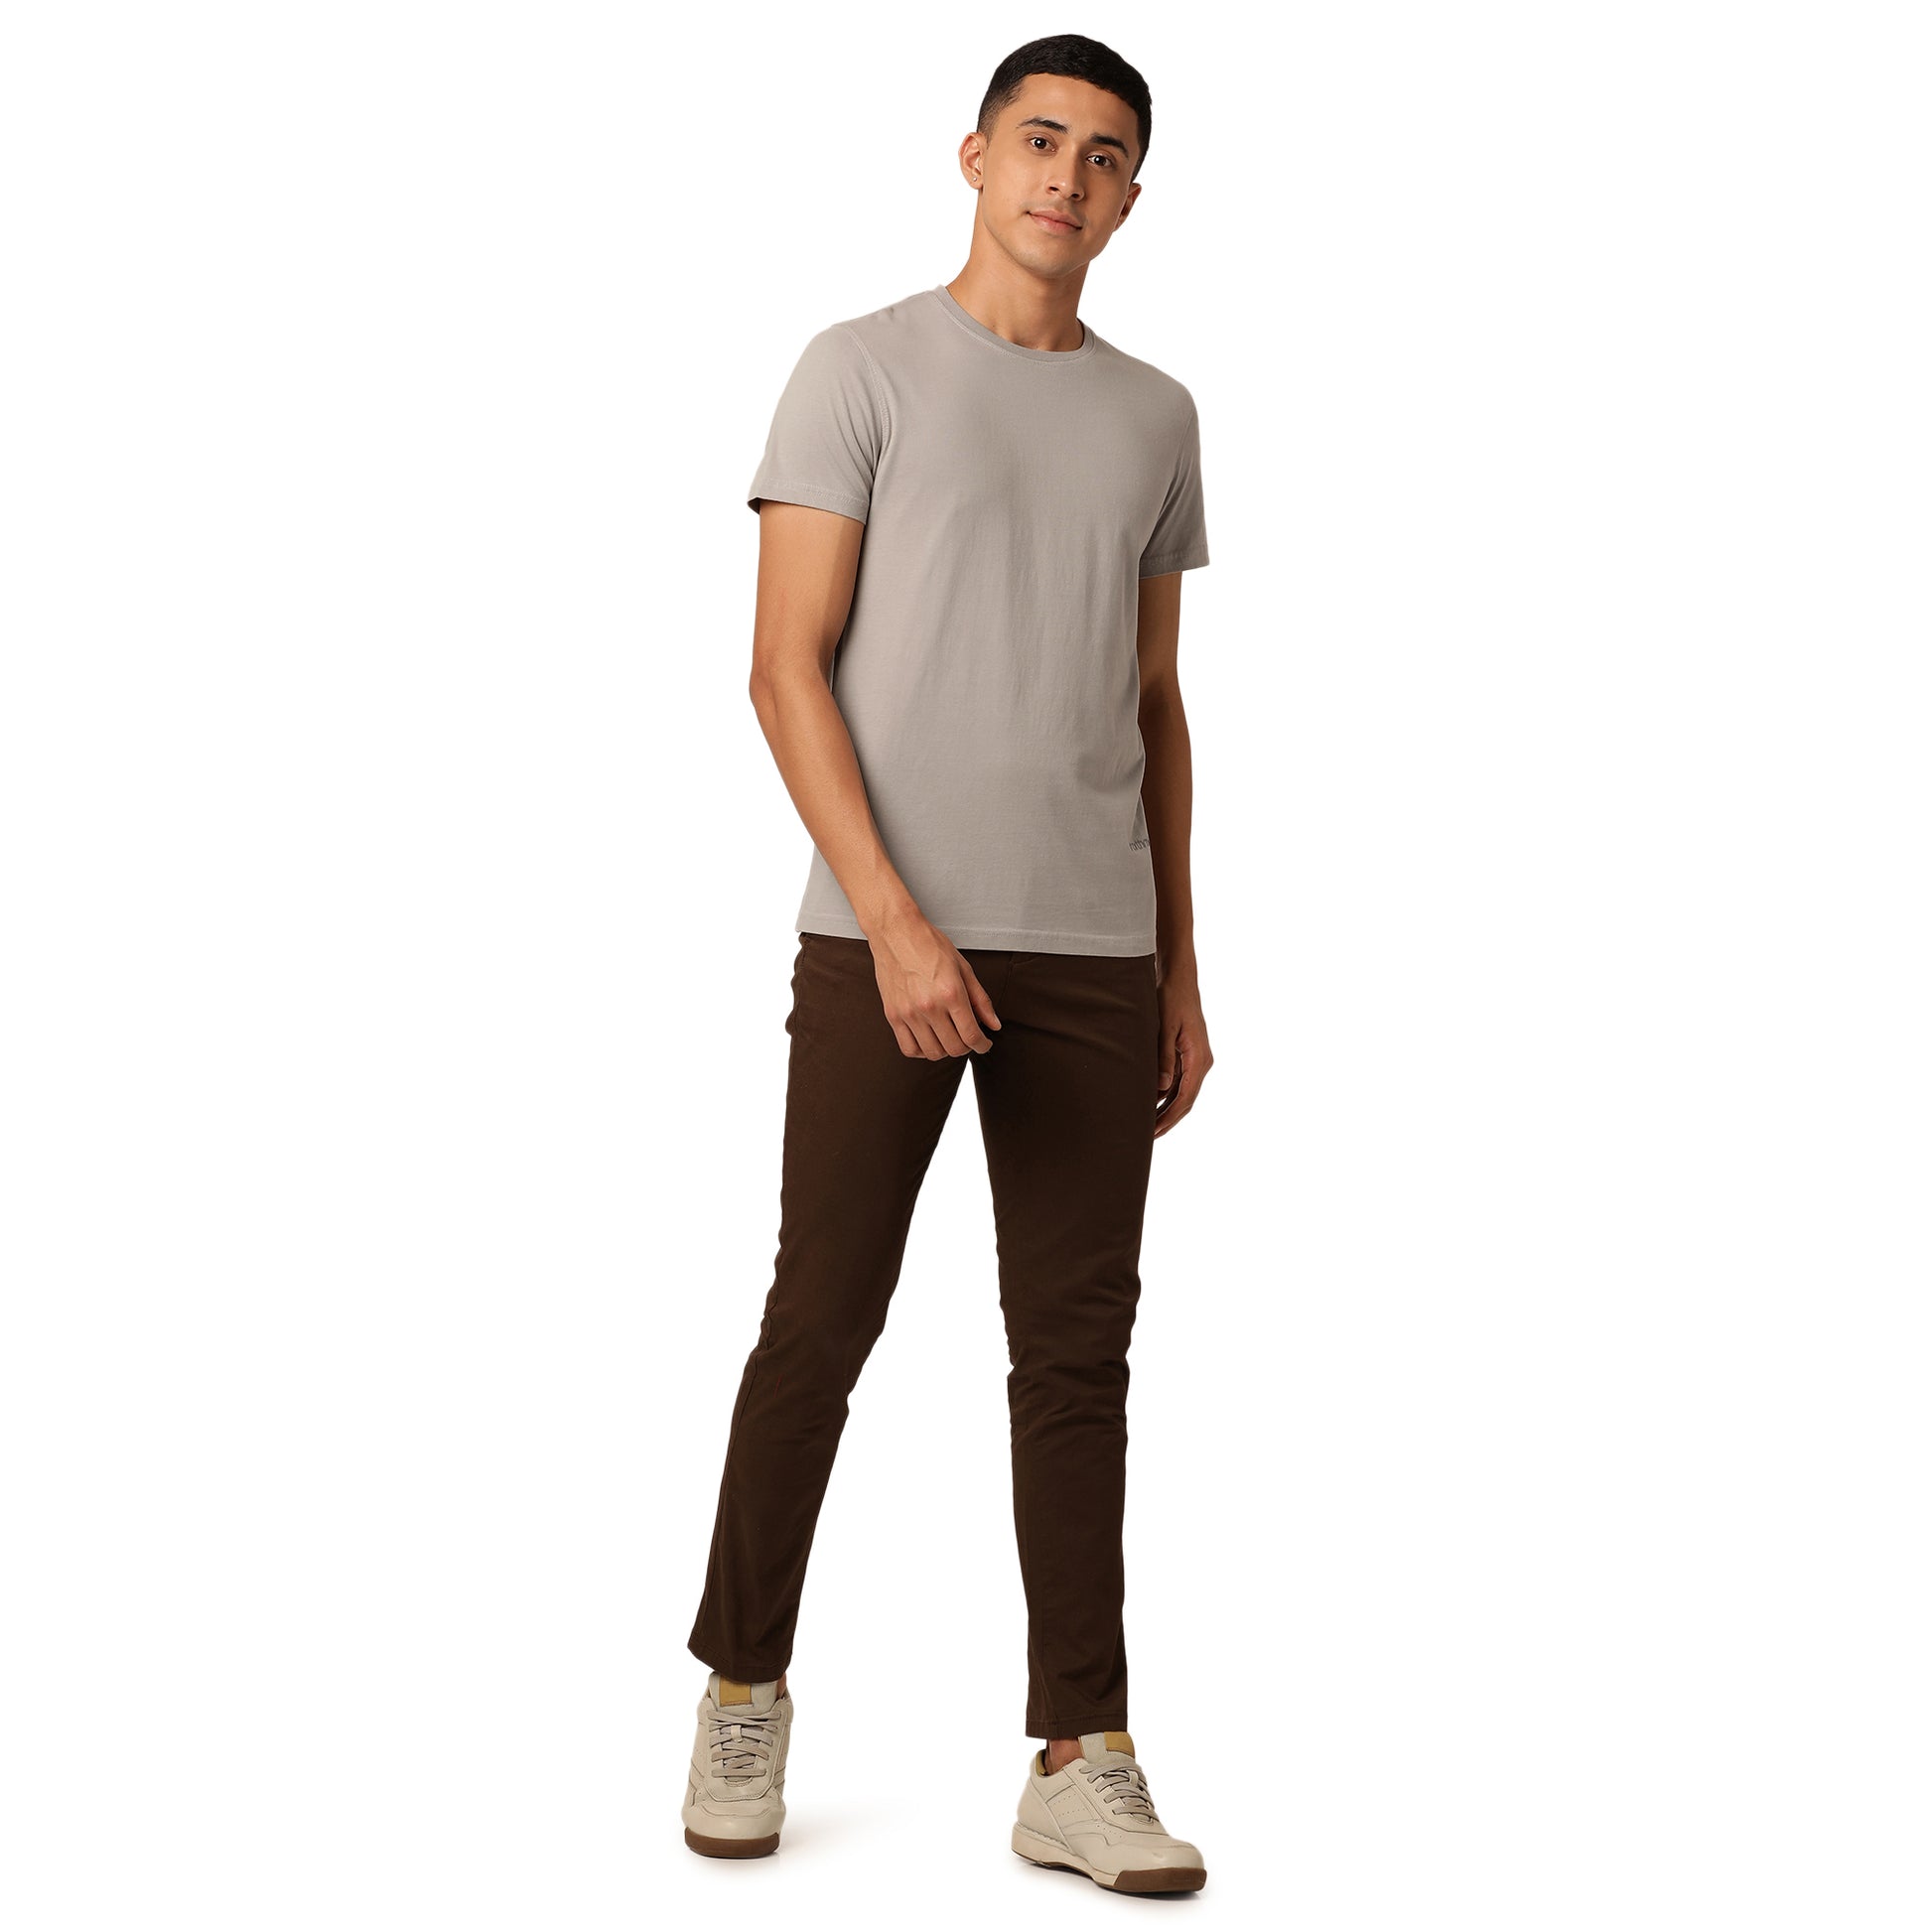 A man stands against a white background, wearing an Amity Combo Pack: Organic Crew Neck T-shirts - Grey and Mustard by Northmist, dark brown pants, and beige sneakers. He is looking slightly to the side with a relaxed expression, with his left hand by his side and his right hand in his pocket.